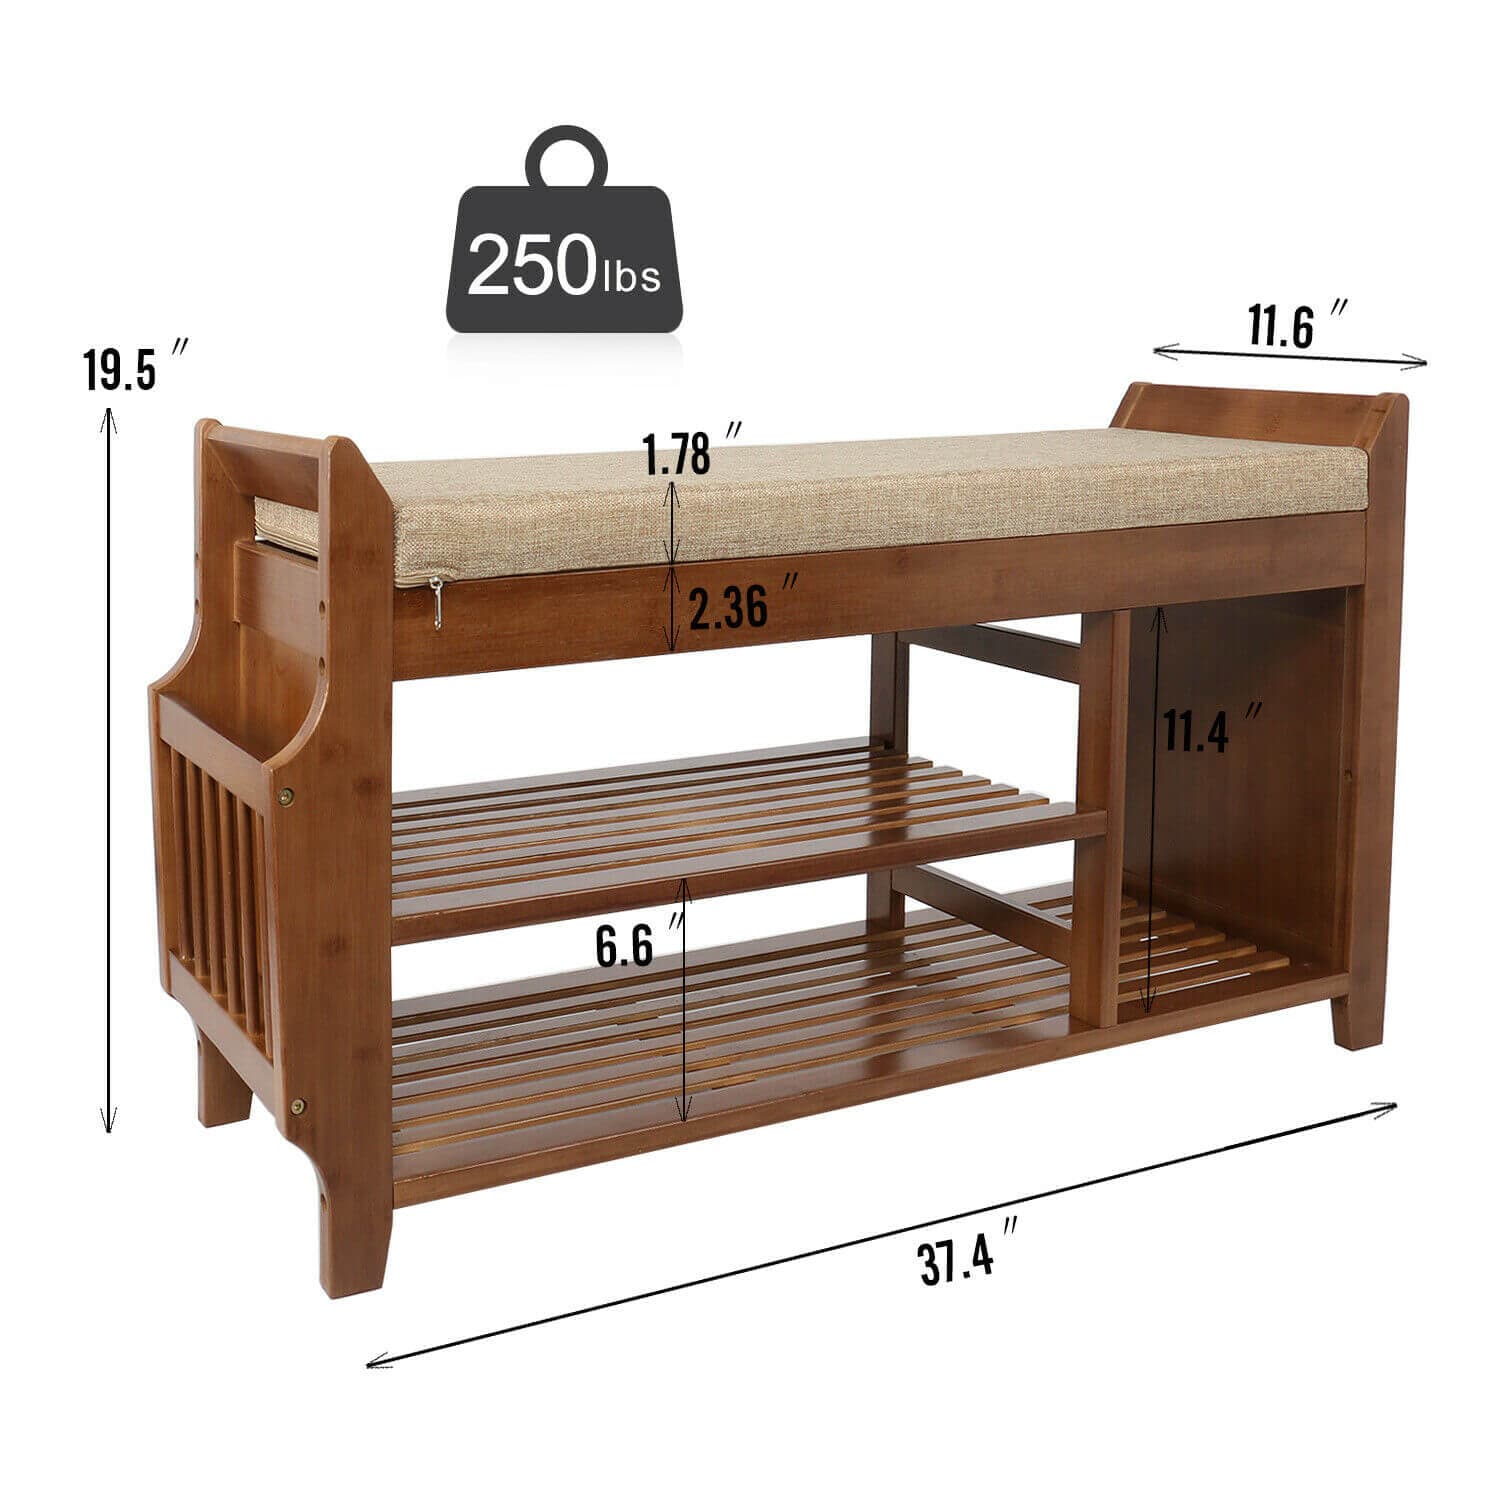 Elecwish Storage Benches 2 Tiers Bamboo Shoe Rack HW105 size